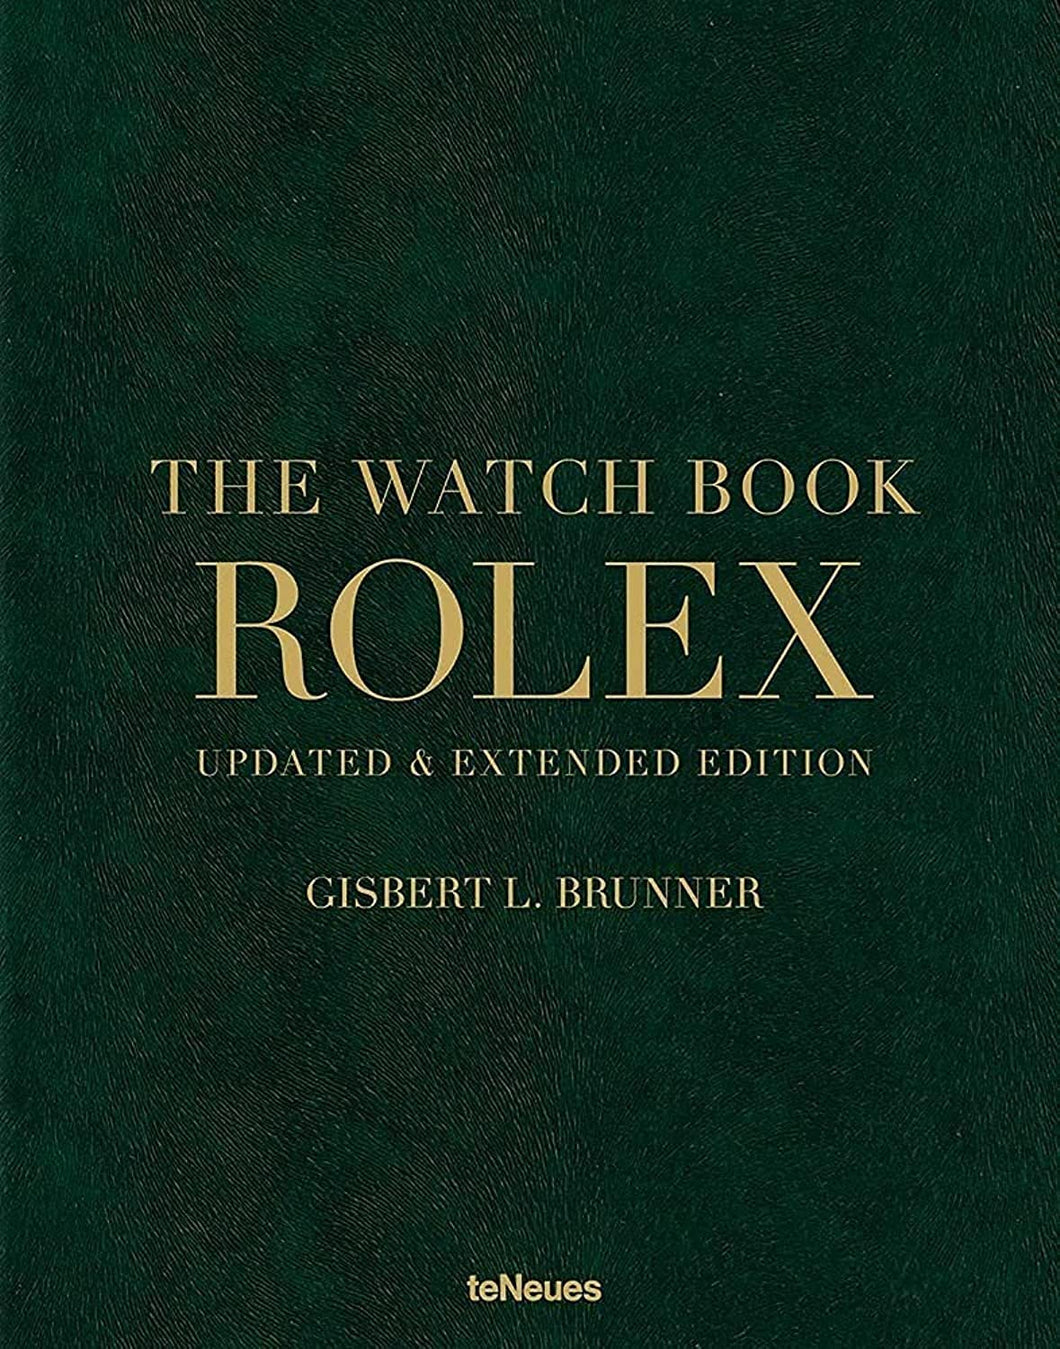 The Watch Book: Rolex (Updated & Expanded Edition